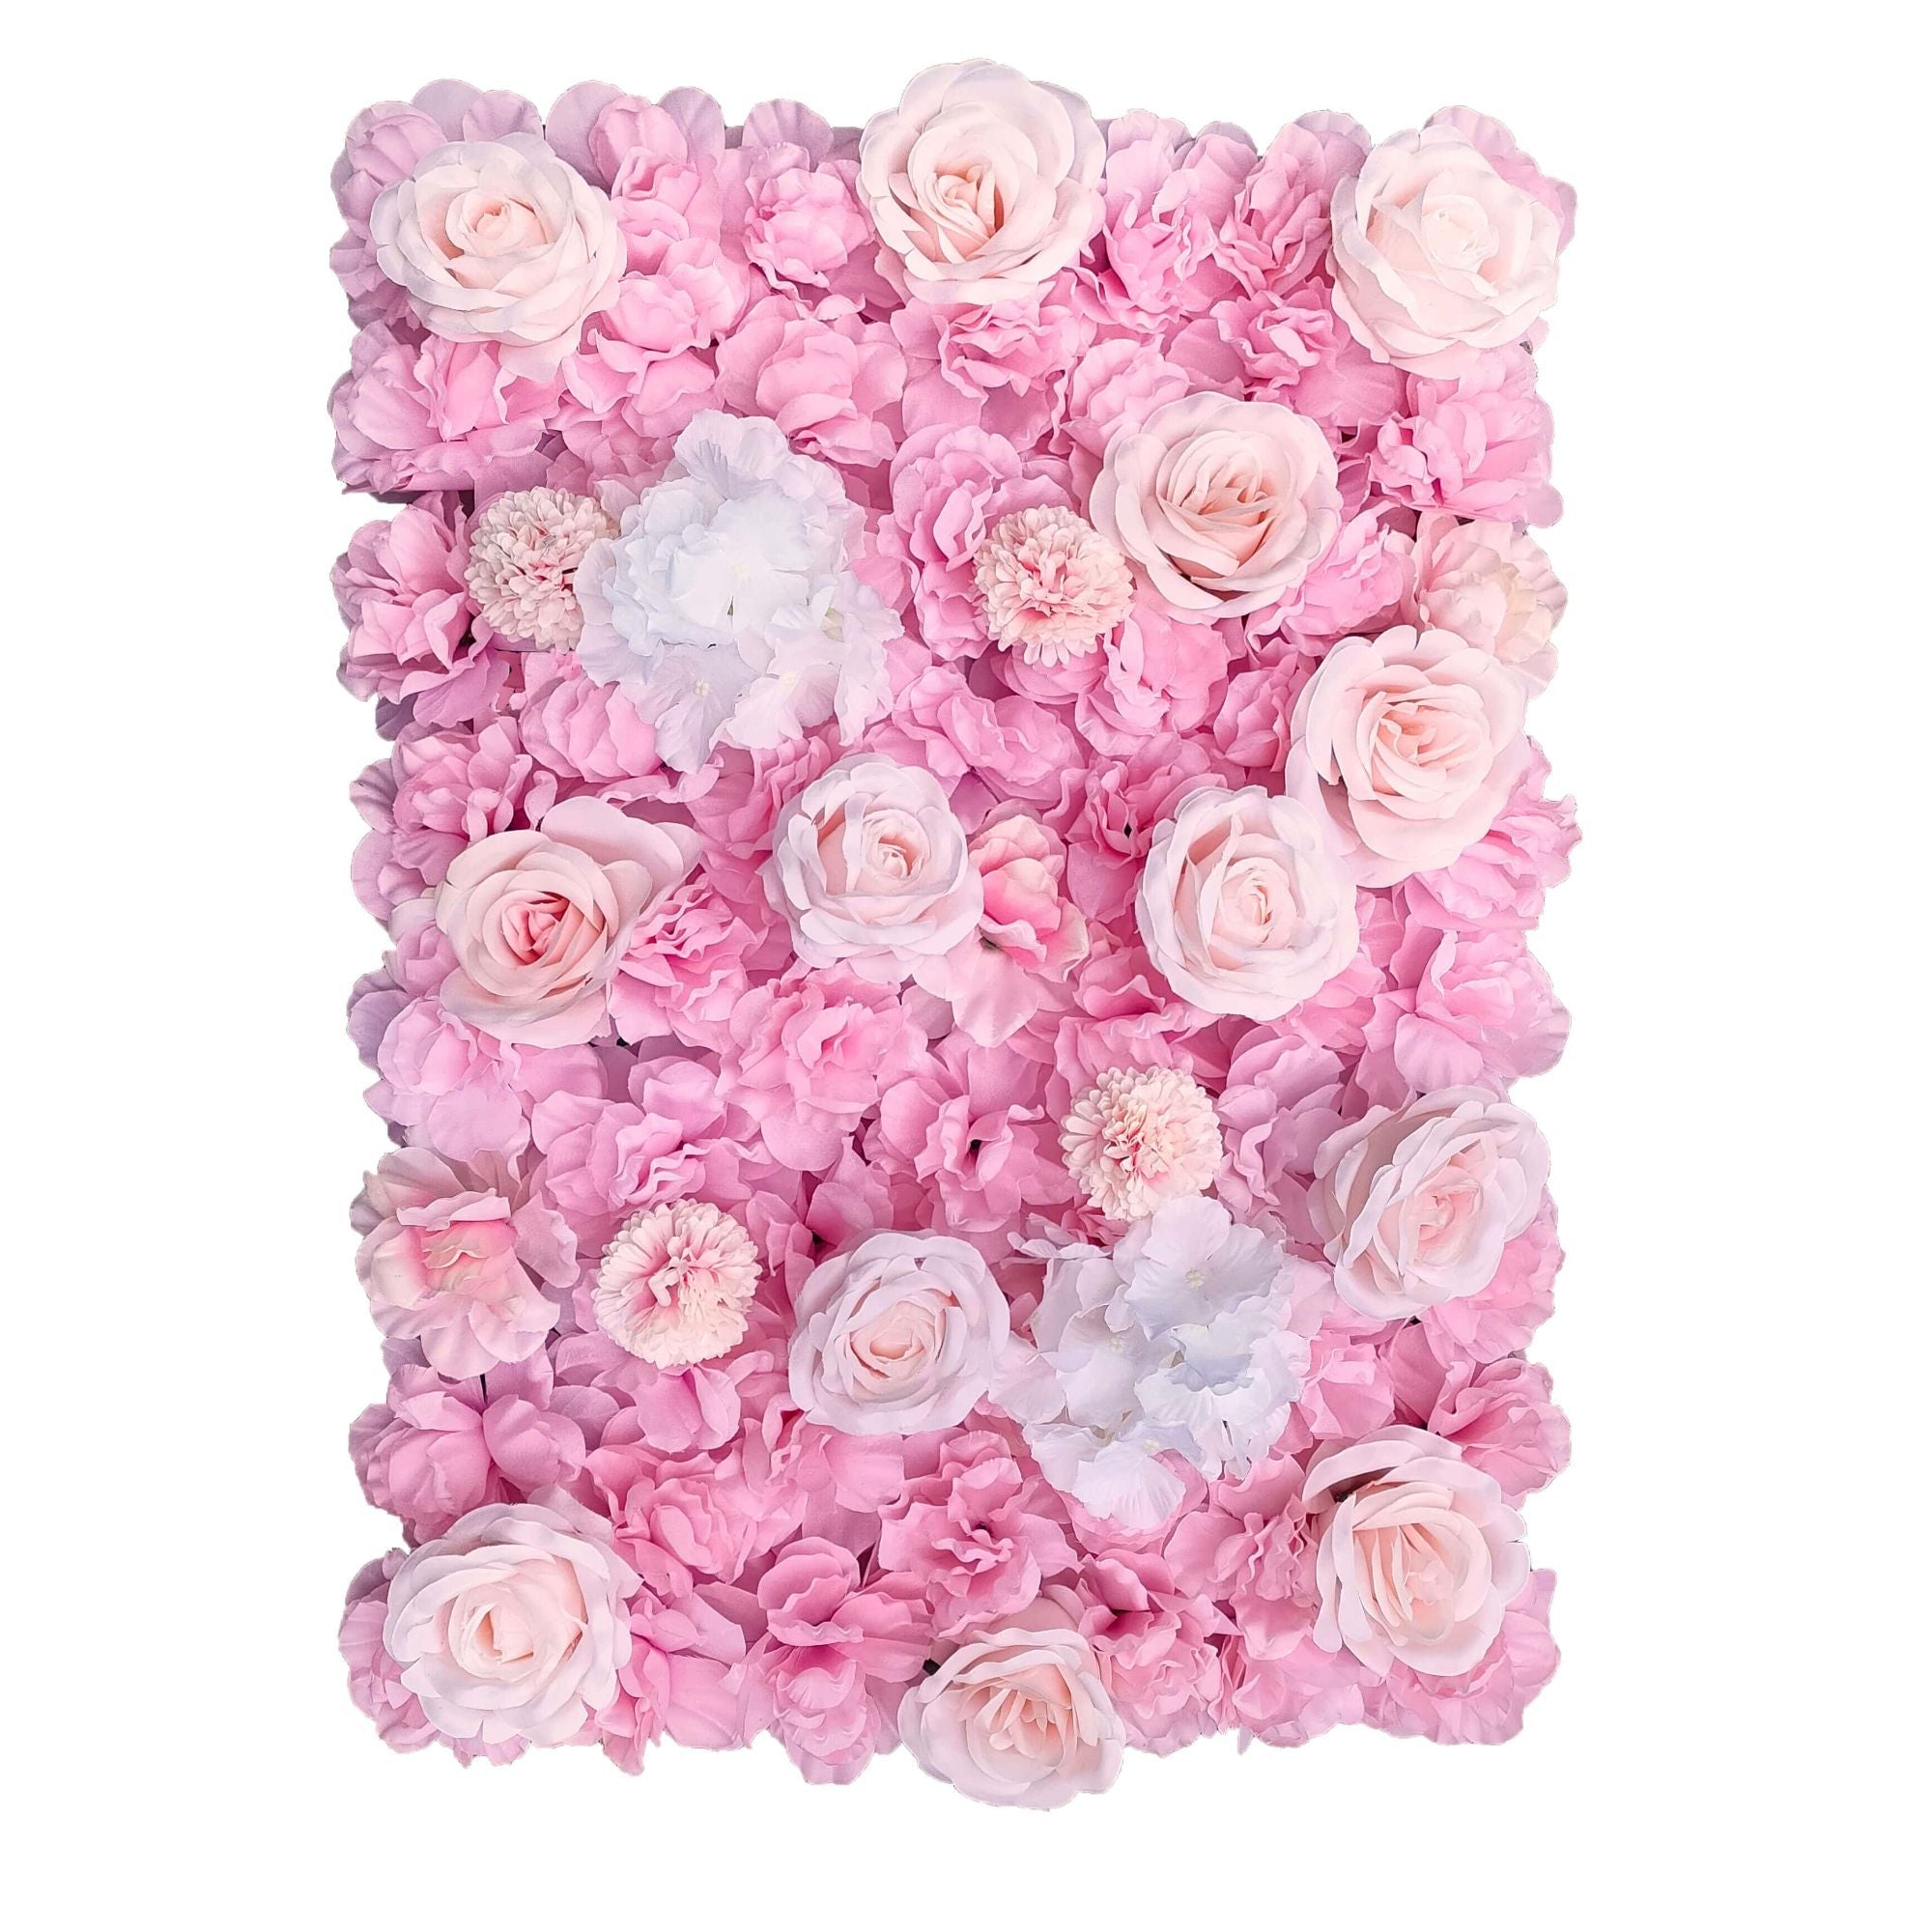 artificial-flower-wall-backdrop-panel-40cm-x-60cm-mixed-white-cream-pink-flowers-123305.jpg